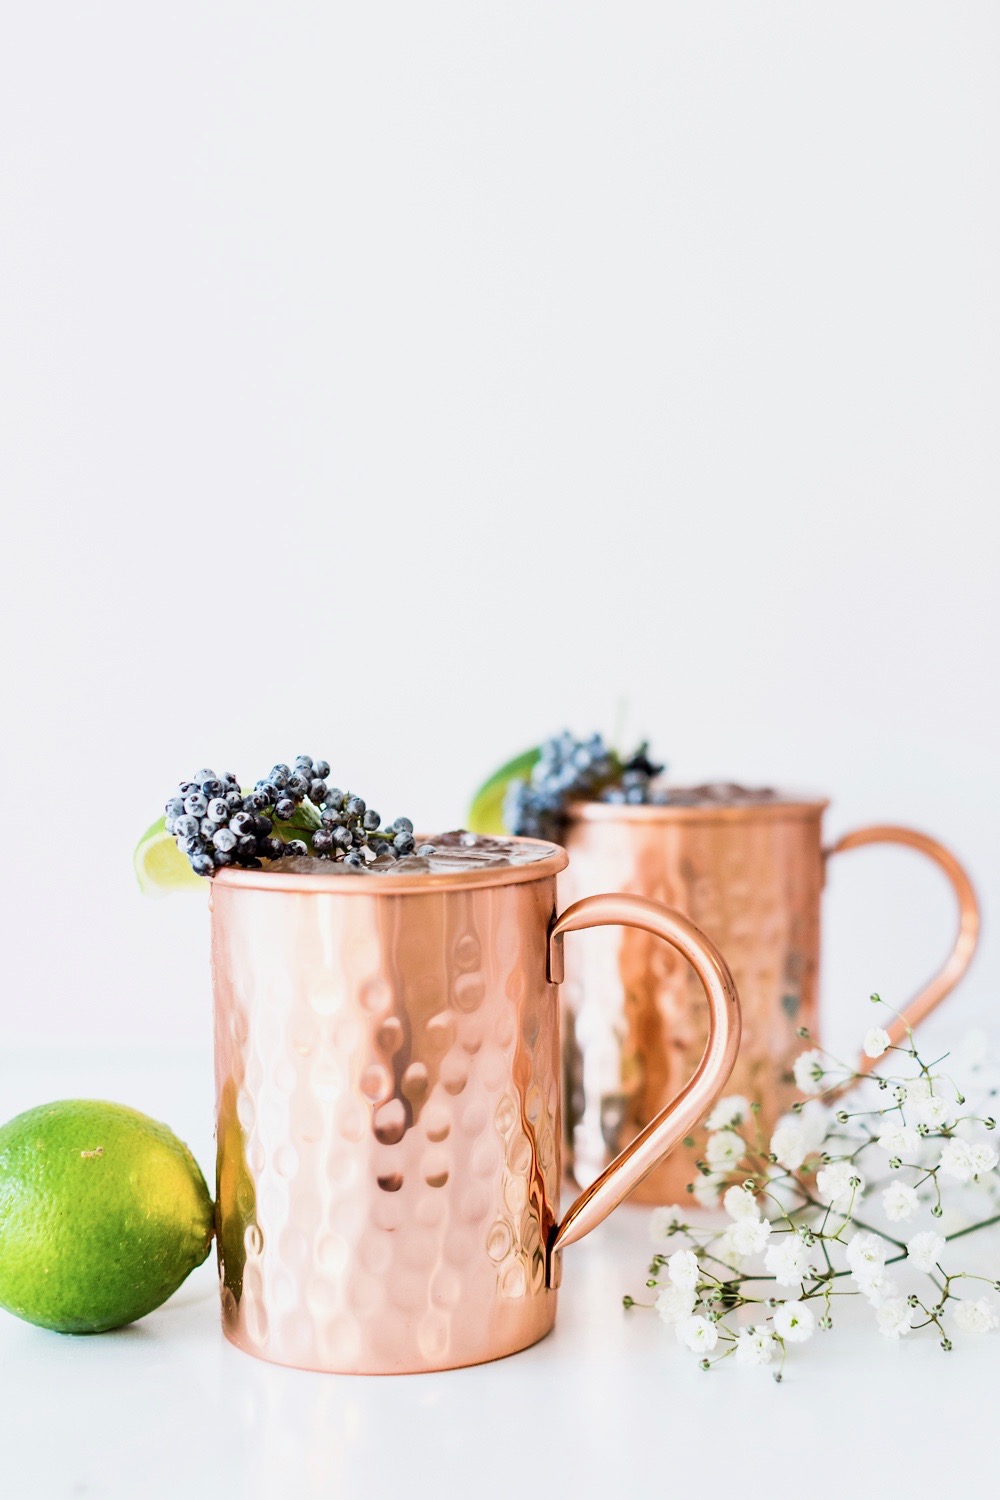 How To Make A Moscow Mule